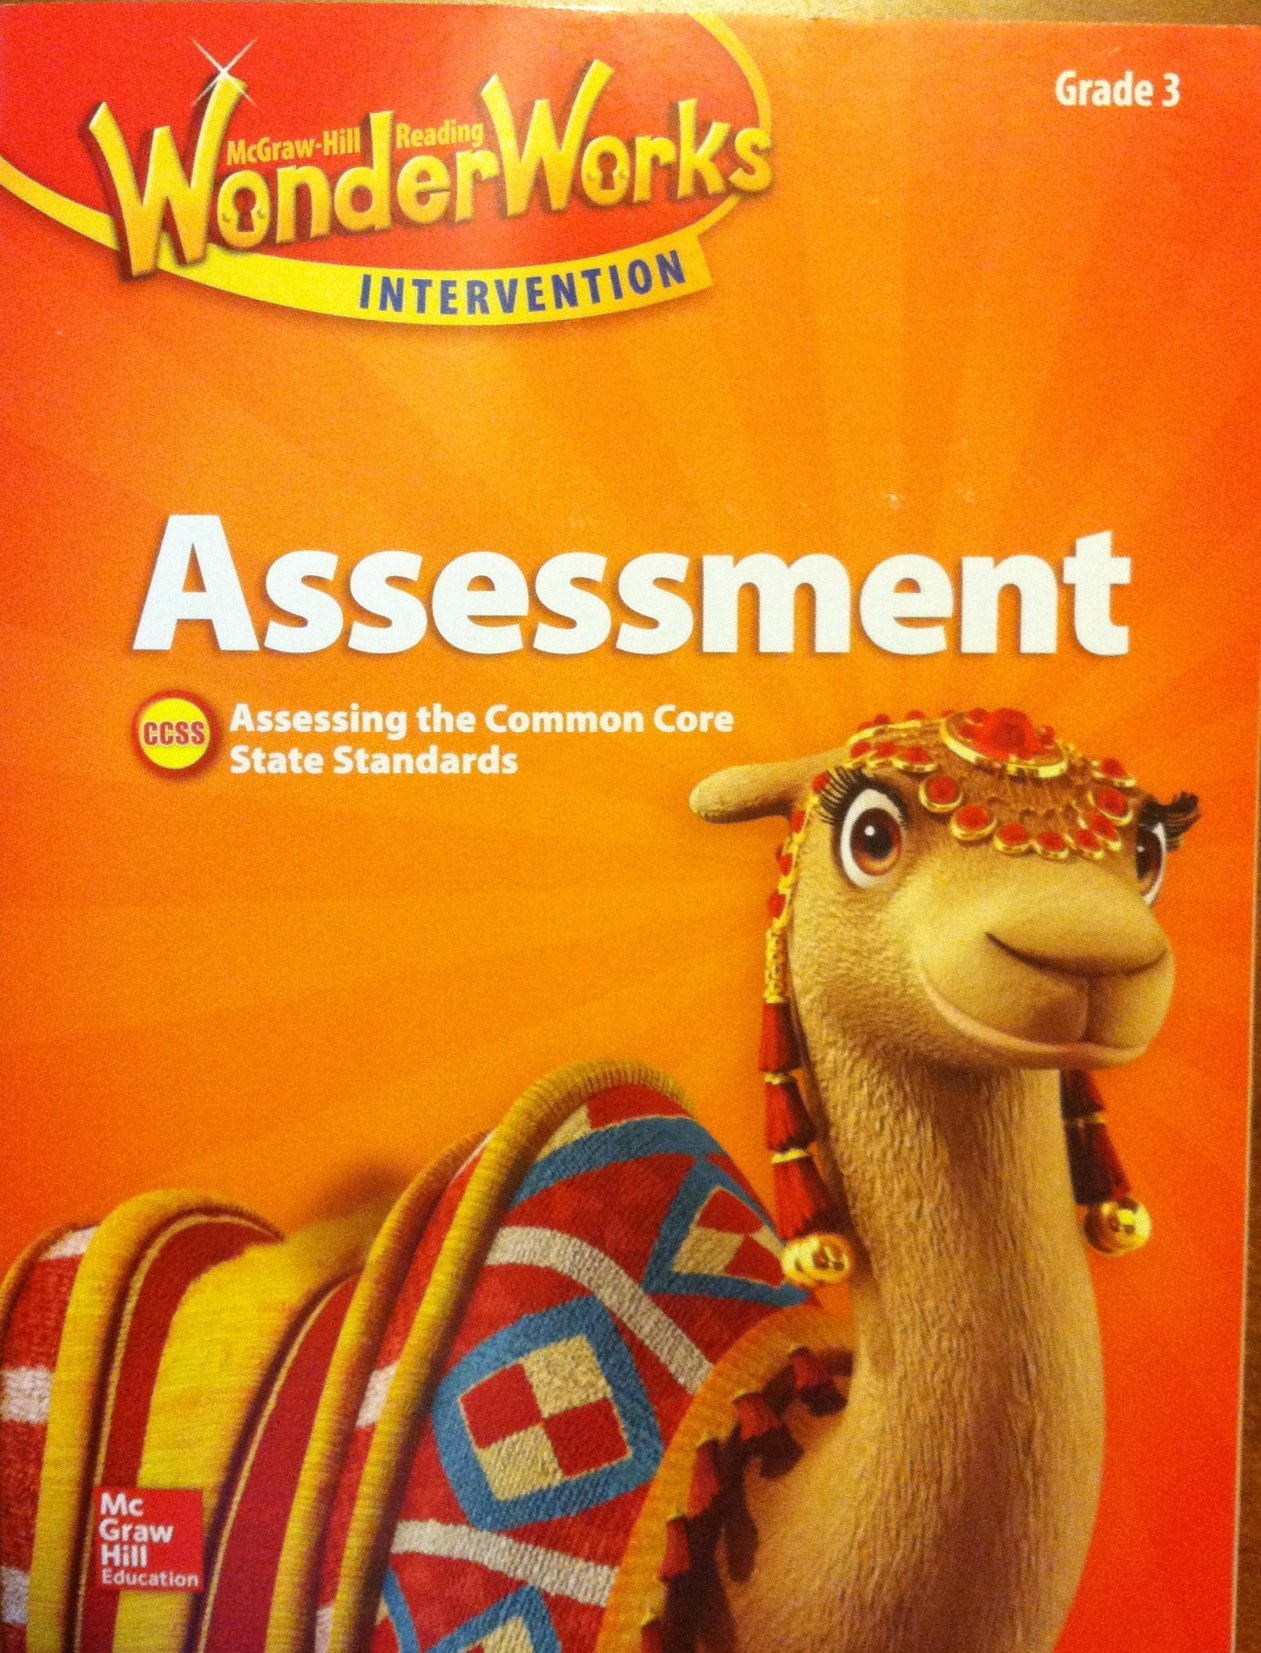 McGraw Hill Reading Wonders, Unit Assessment, Grade 3, Assessing the Common Core State Standards, CCSS by McGraw Hill Education (2014-05-03)